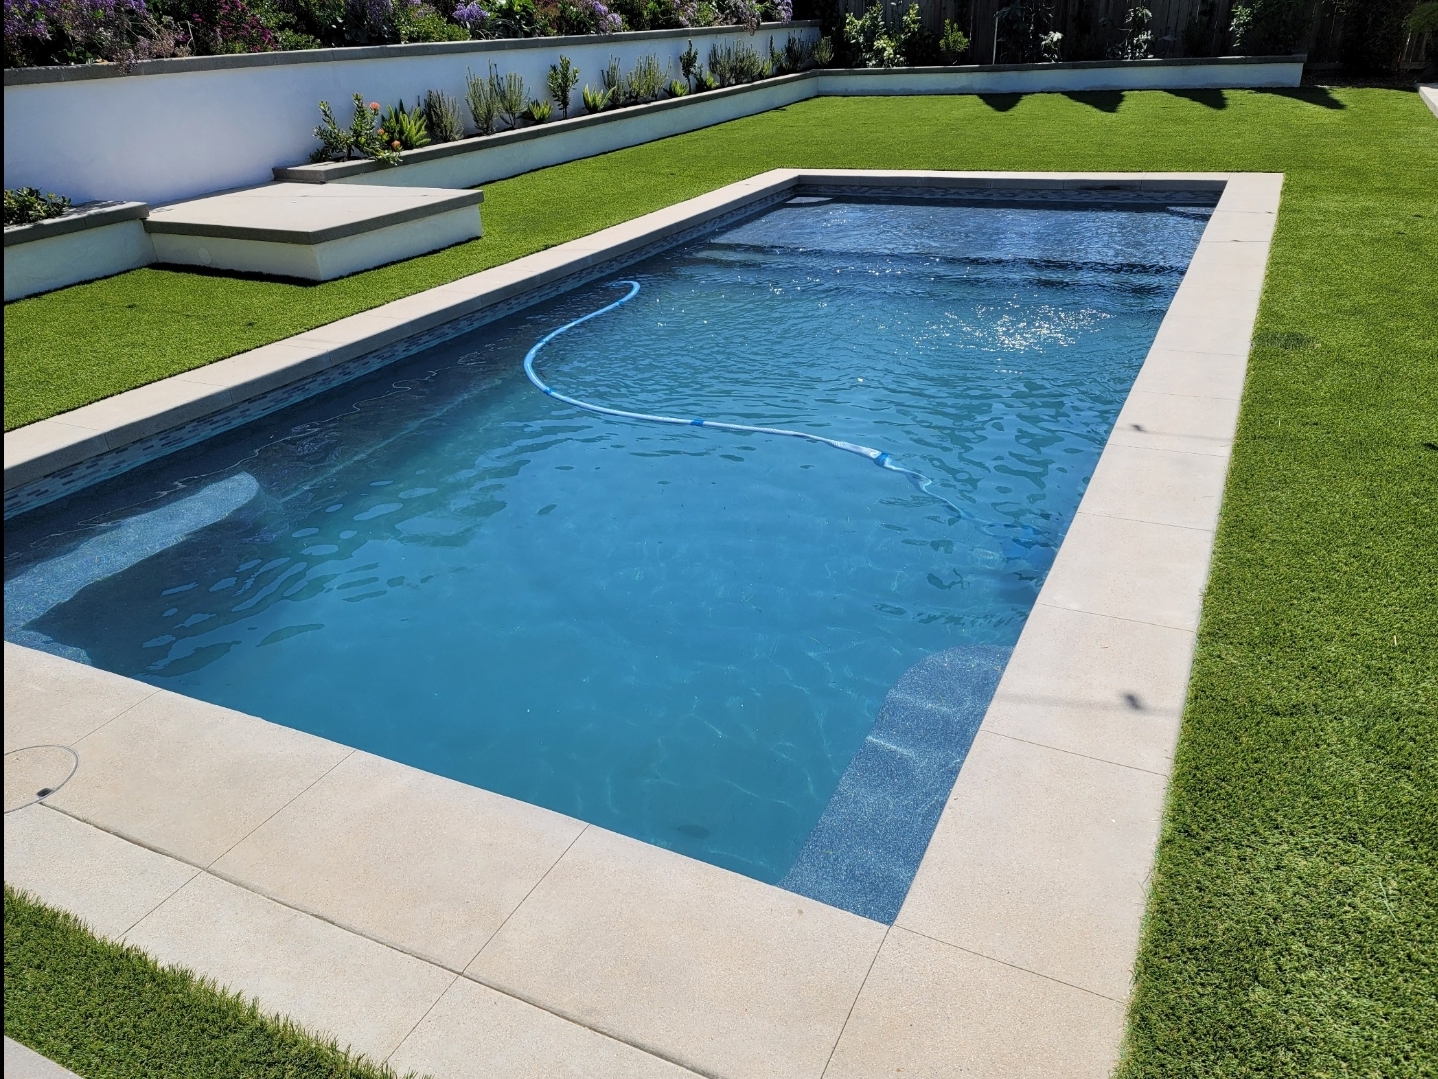 Fiberglass pools in Orange County by VIP Construction and Engineering Inc